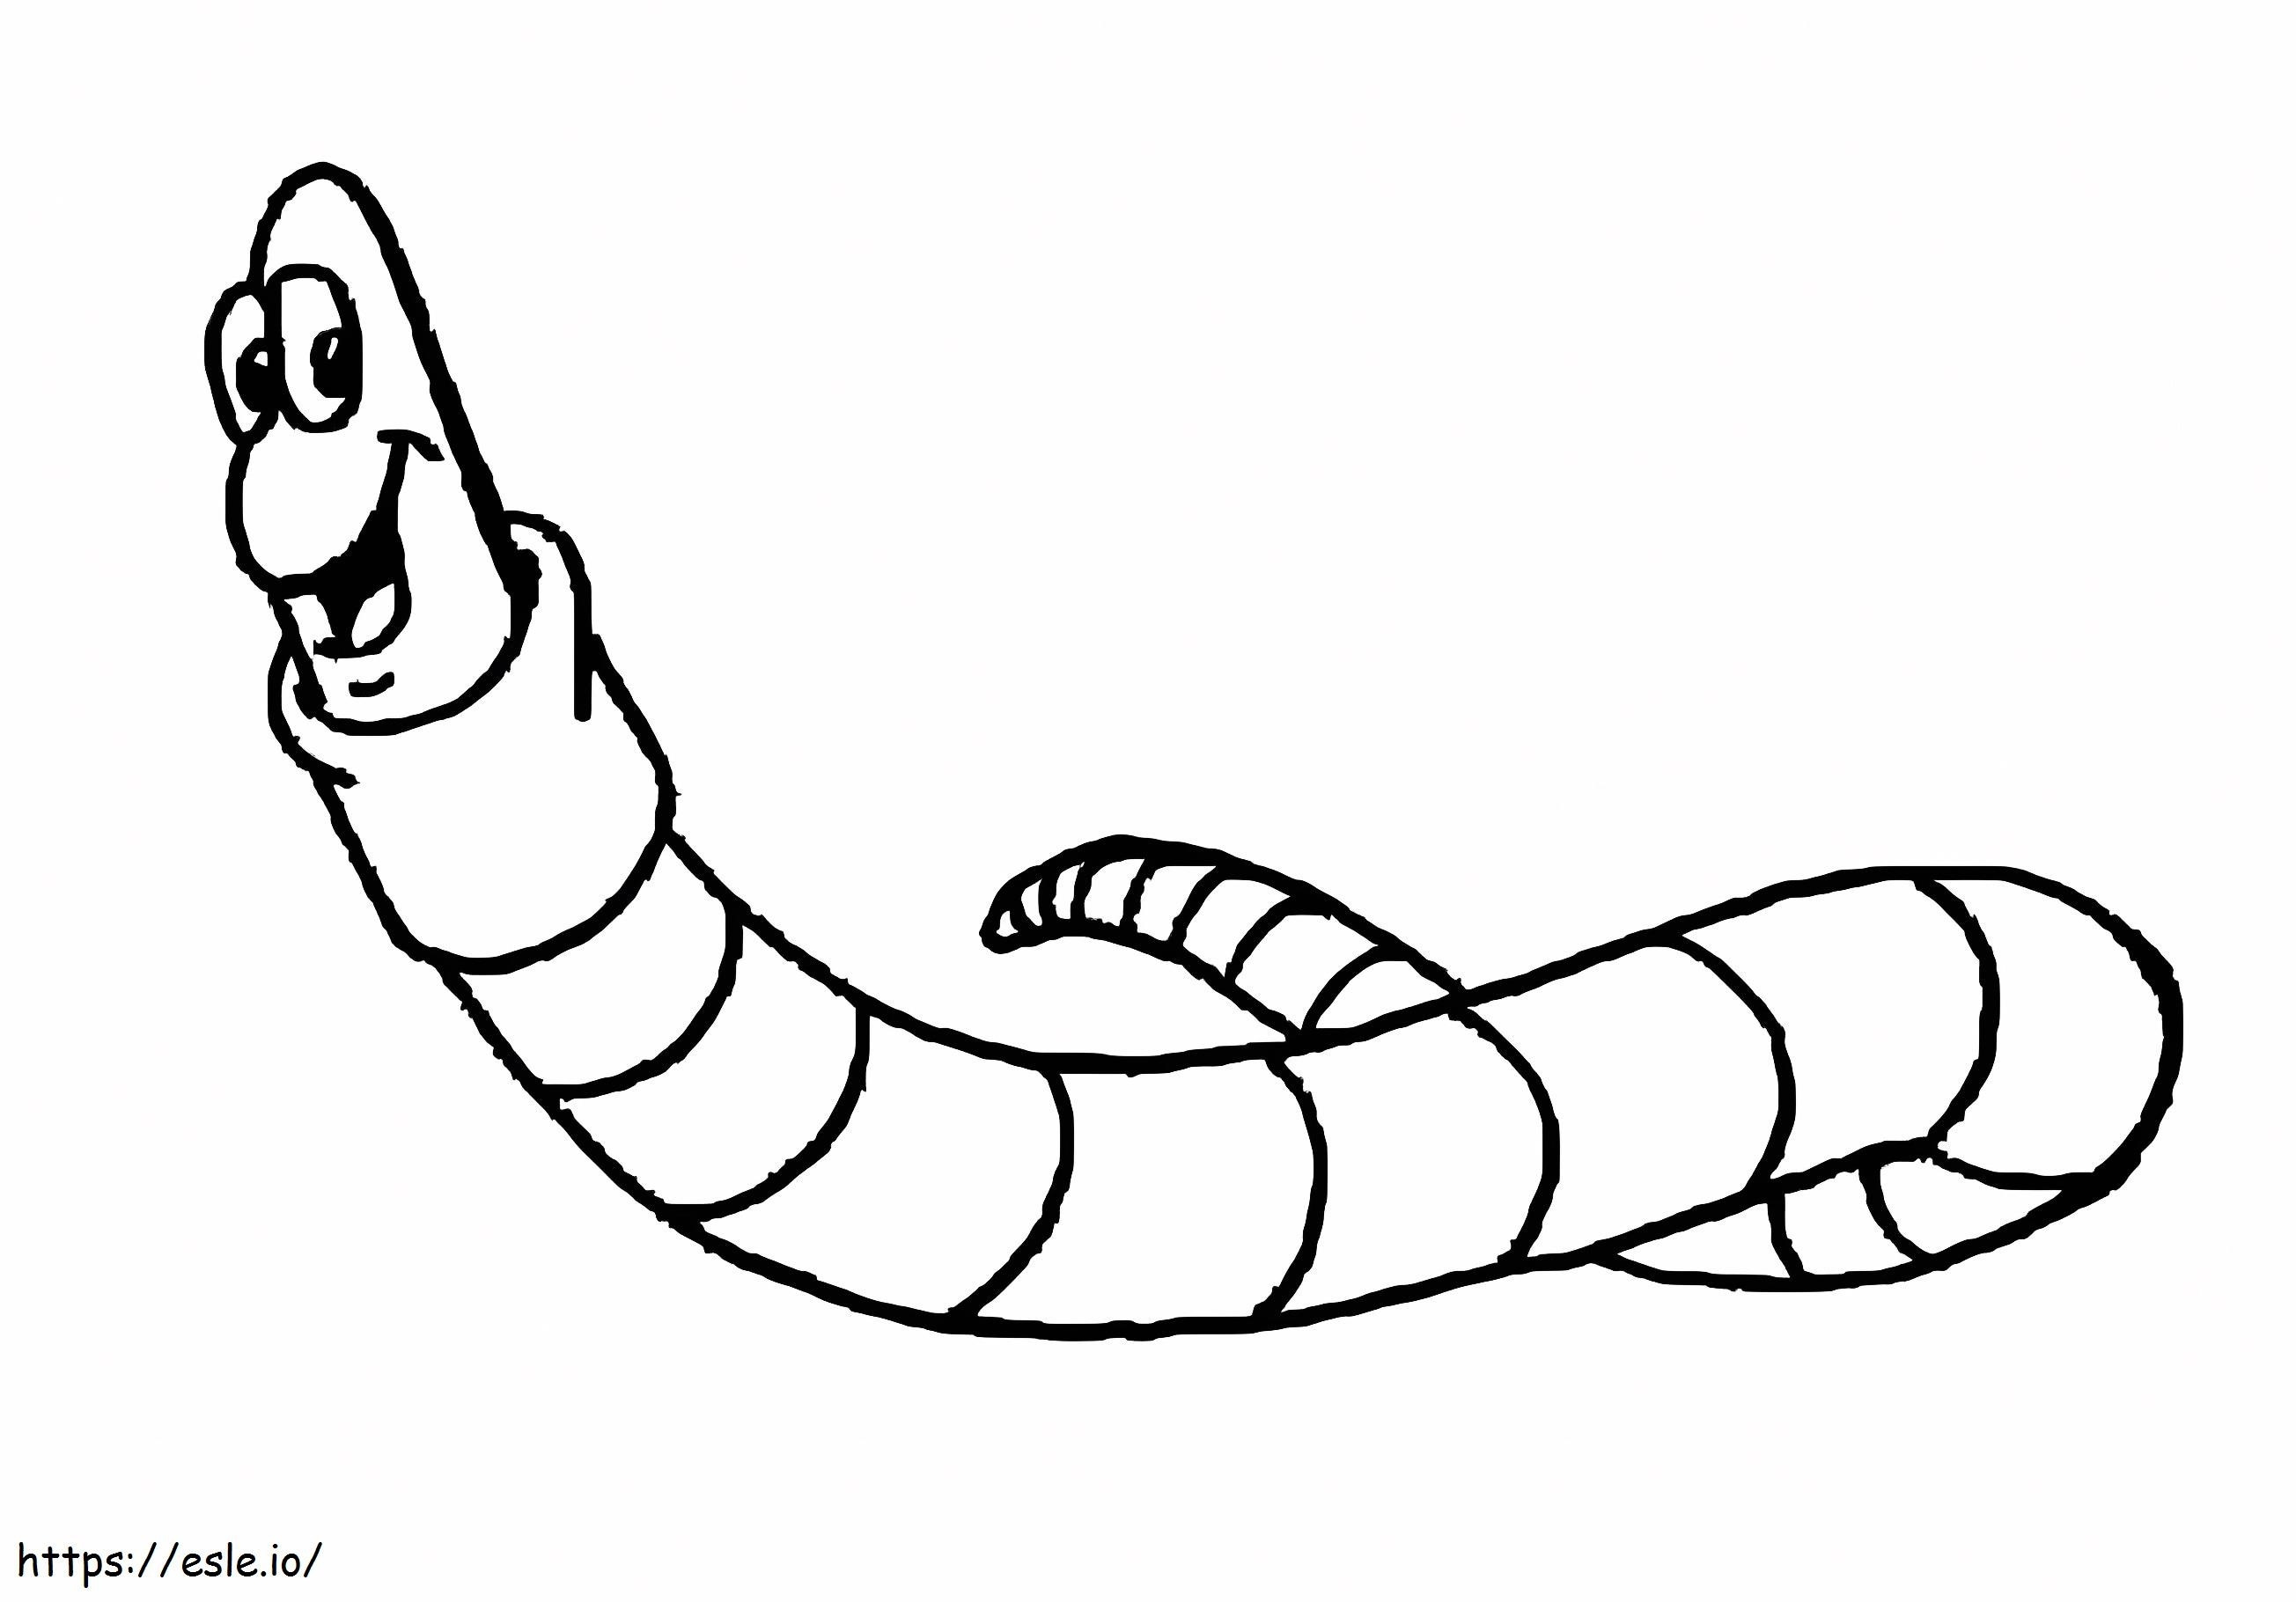 Earthworm Is Smiling coloring page